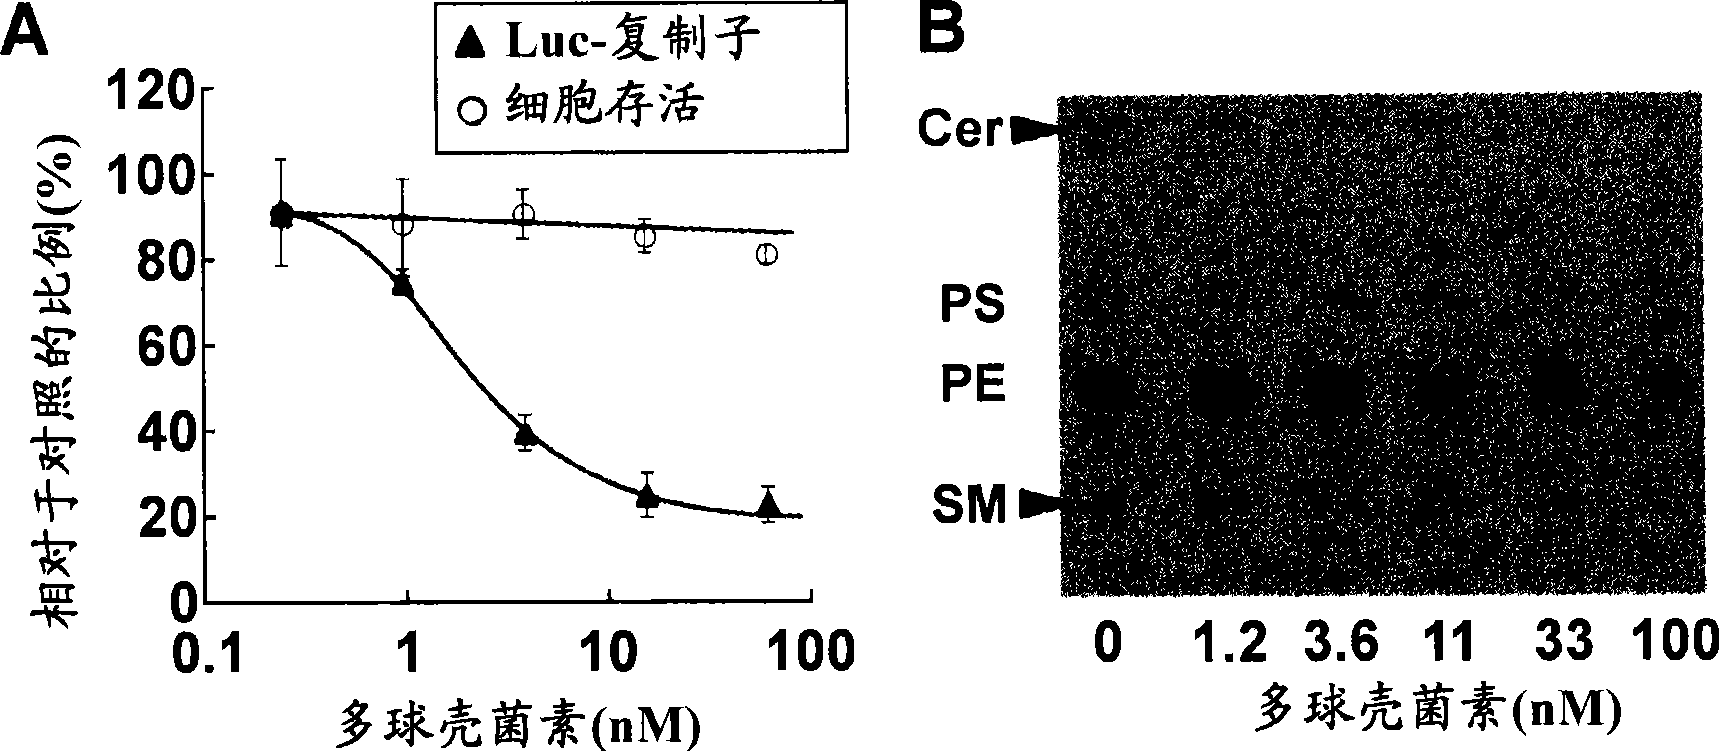 Pharmaceutical composition for treating or preventing hcv infection